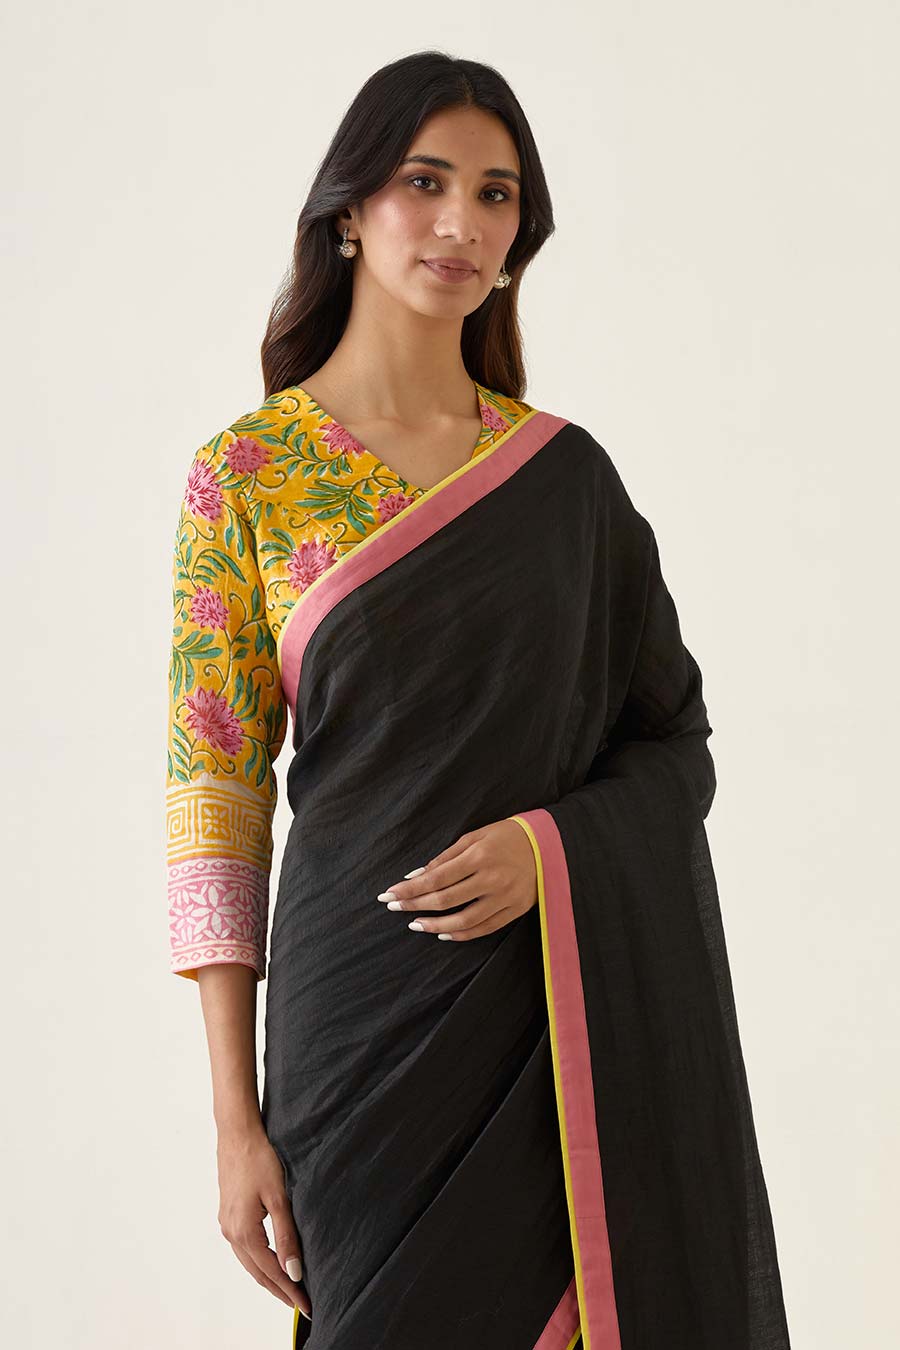 Handcrafted Saree in Black with Yellow & Pink Border